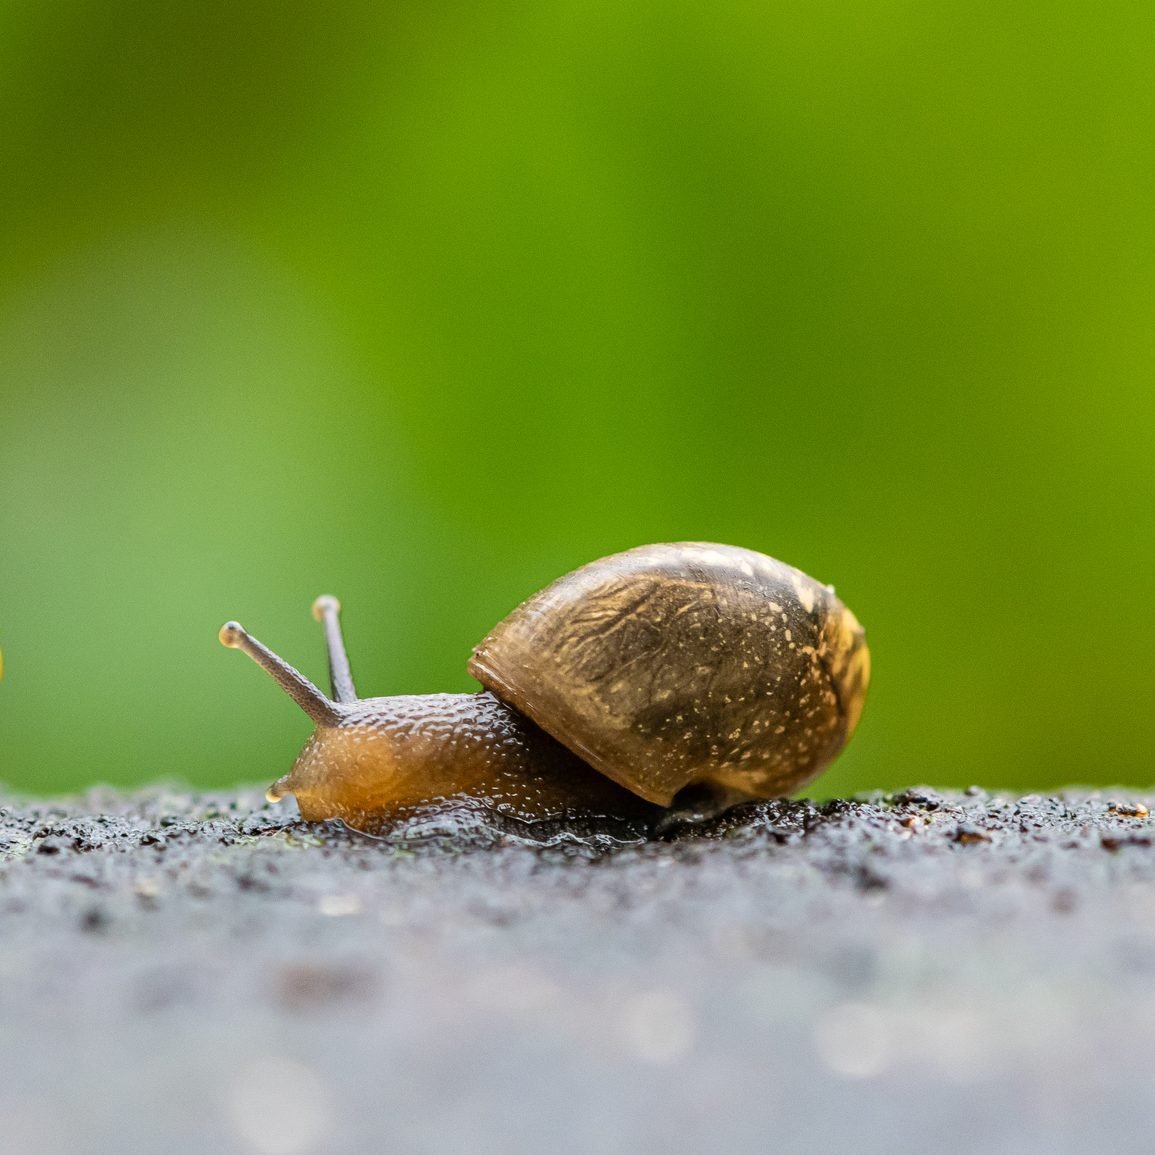 one garden snail crawling after each other on wet floor with green background